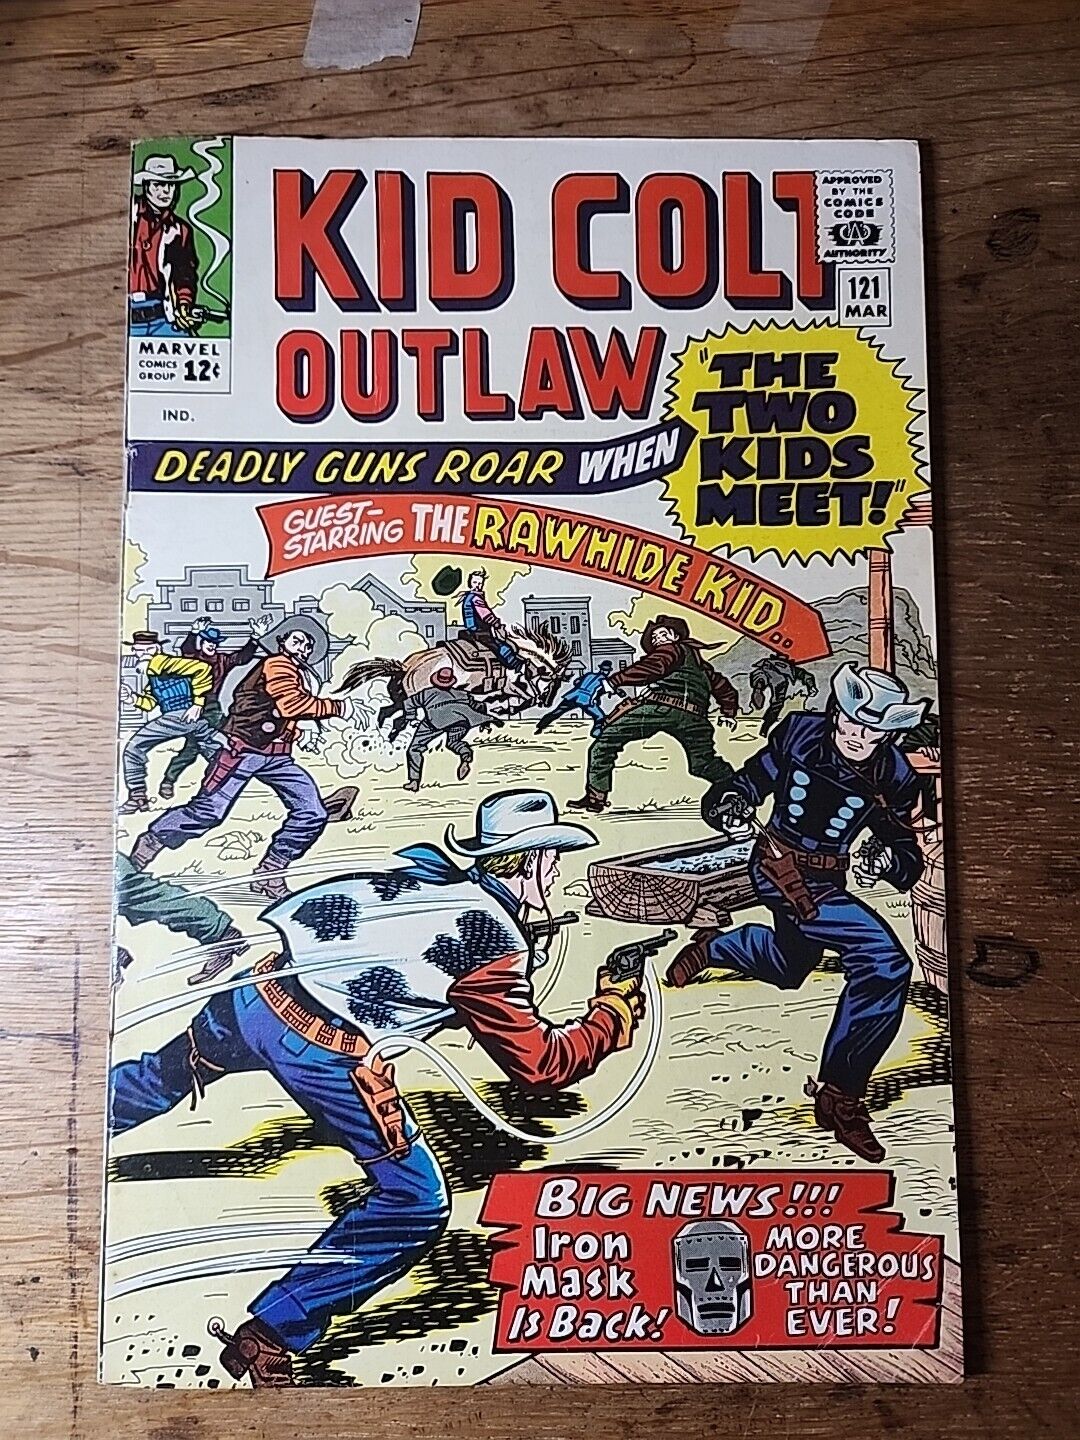 Kid Colt Outlaw Issue 121 March 1965 - Marvel Silver Age Cowboy Comic